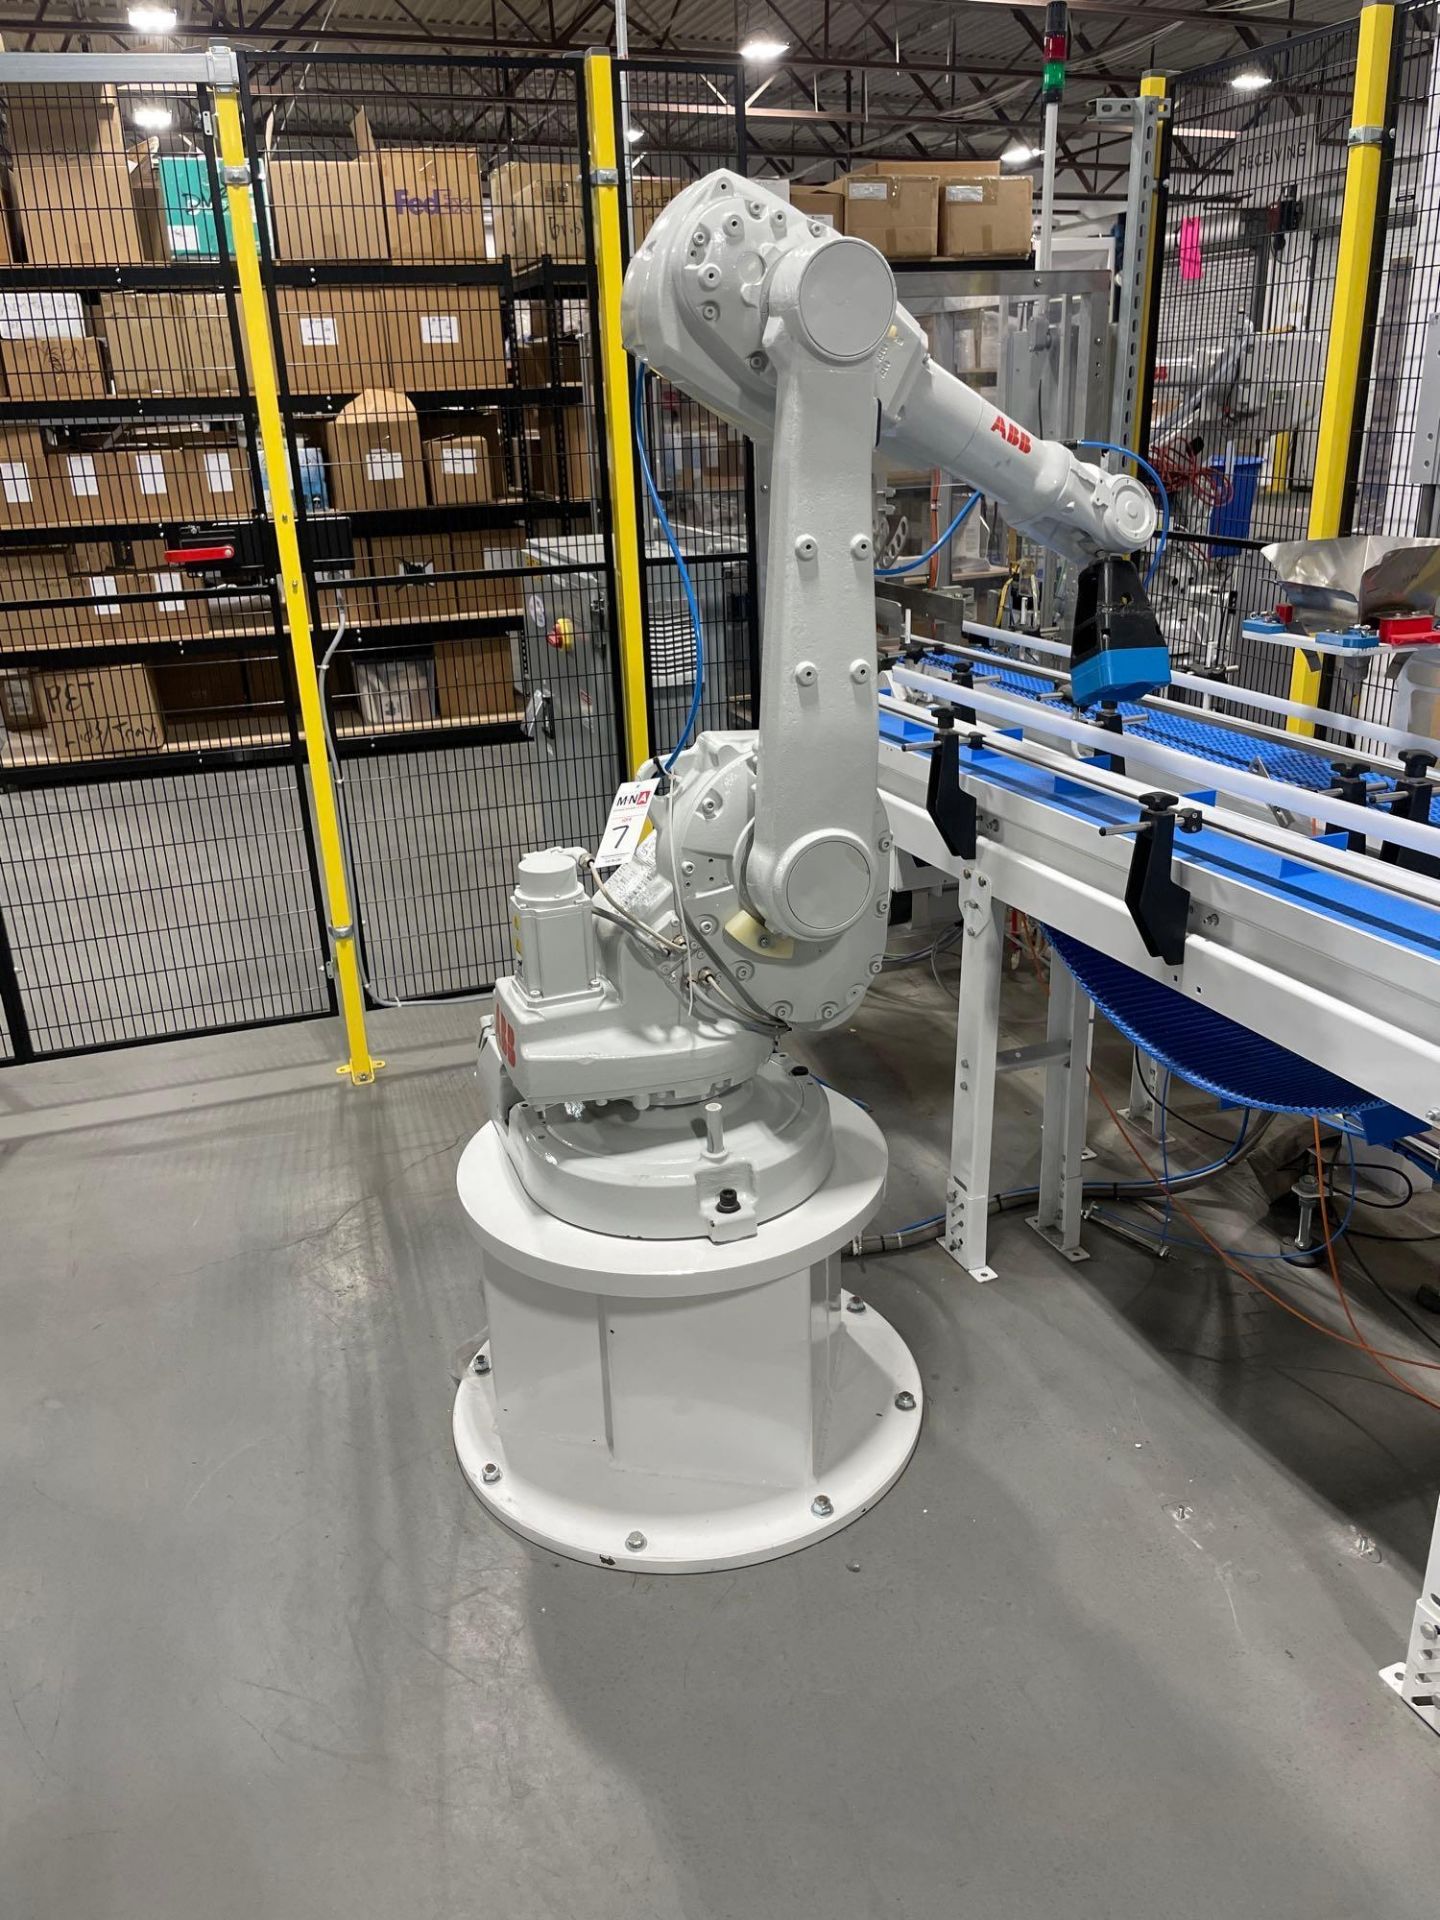 ABB IRB 1600 M2004 6-Axis Robot w/ Power Supply, 10 kg Cap., New 2017 - Image 2 of 11